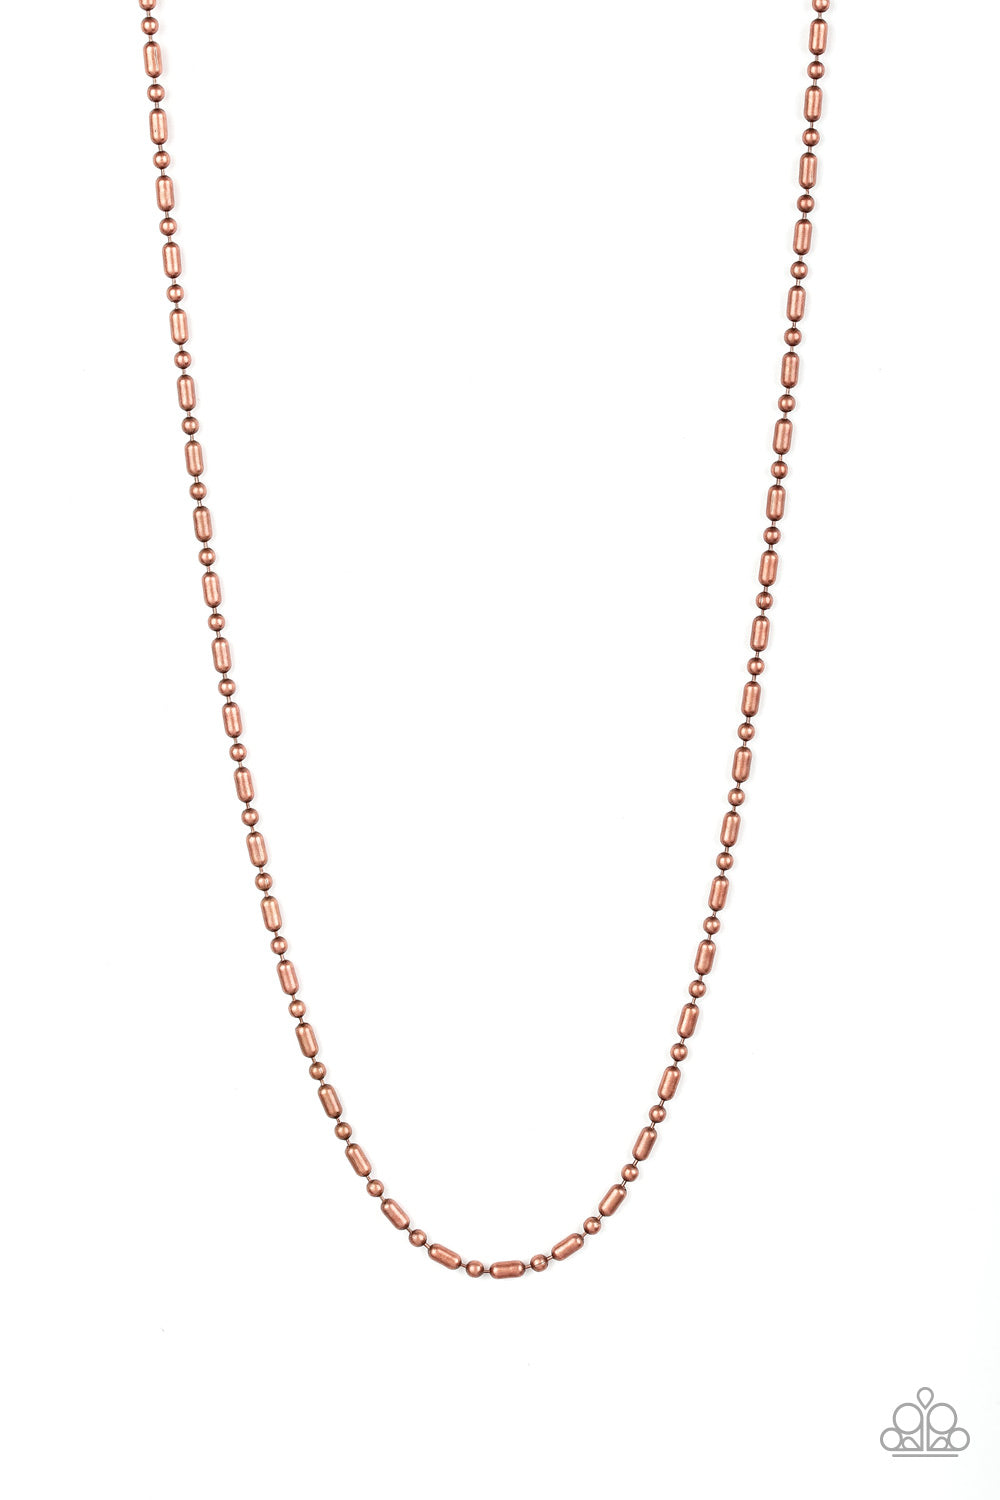 Covert Operation Copper Urban Necklace - Paparazzi Accessories - jazzy-jewels-gems